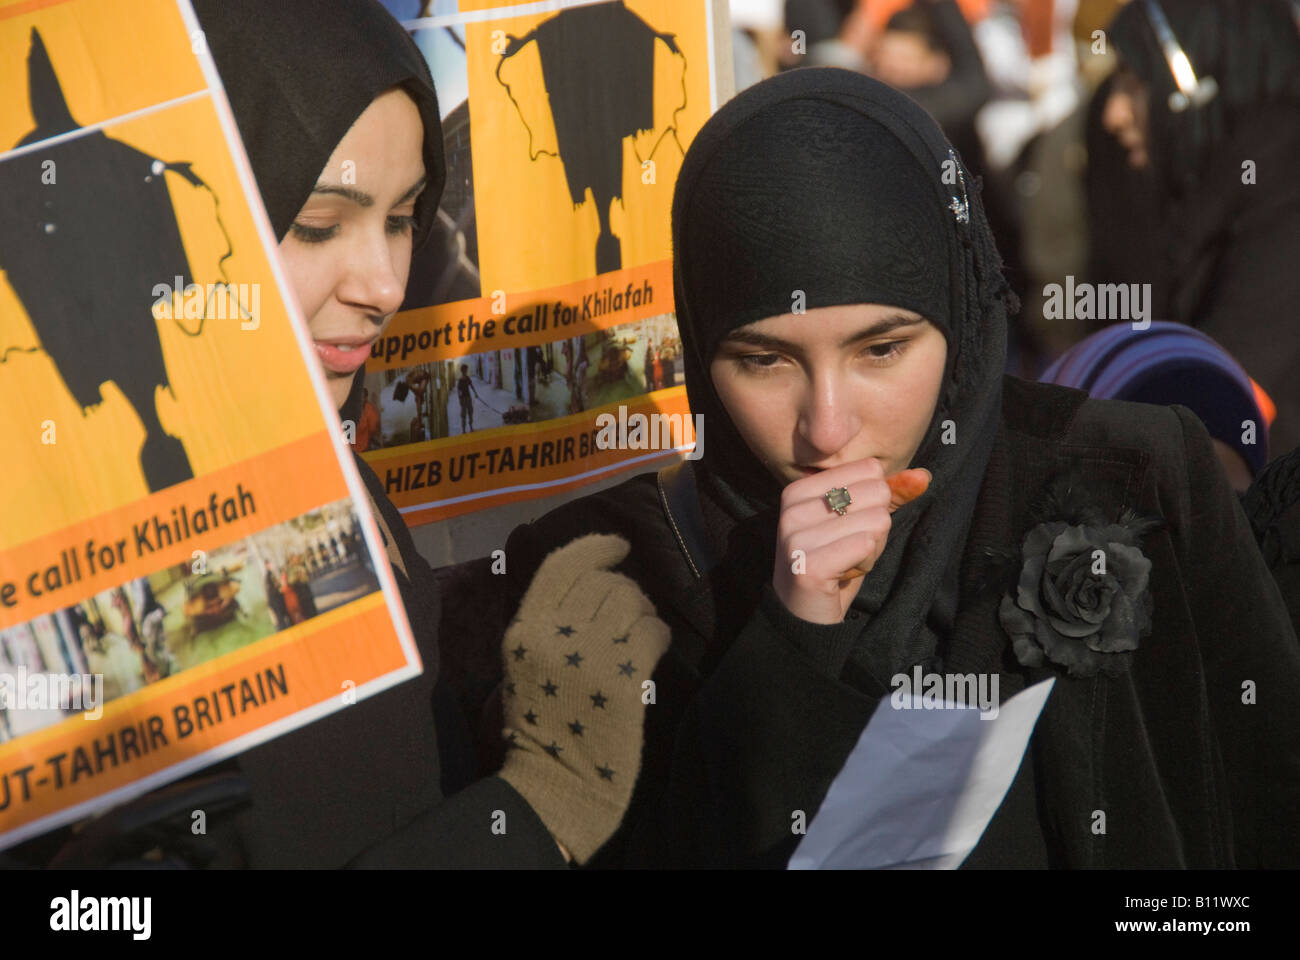 Women in Islamic dress with posters supporting Khilafah and Abu Ghraib image at Hizb ut-Tahrir Britain rally in London Stock Photo